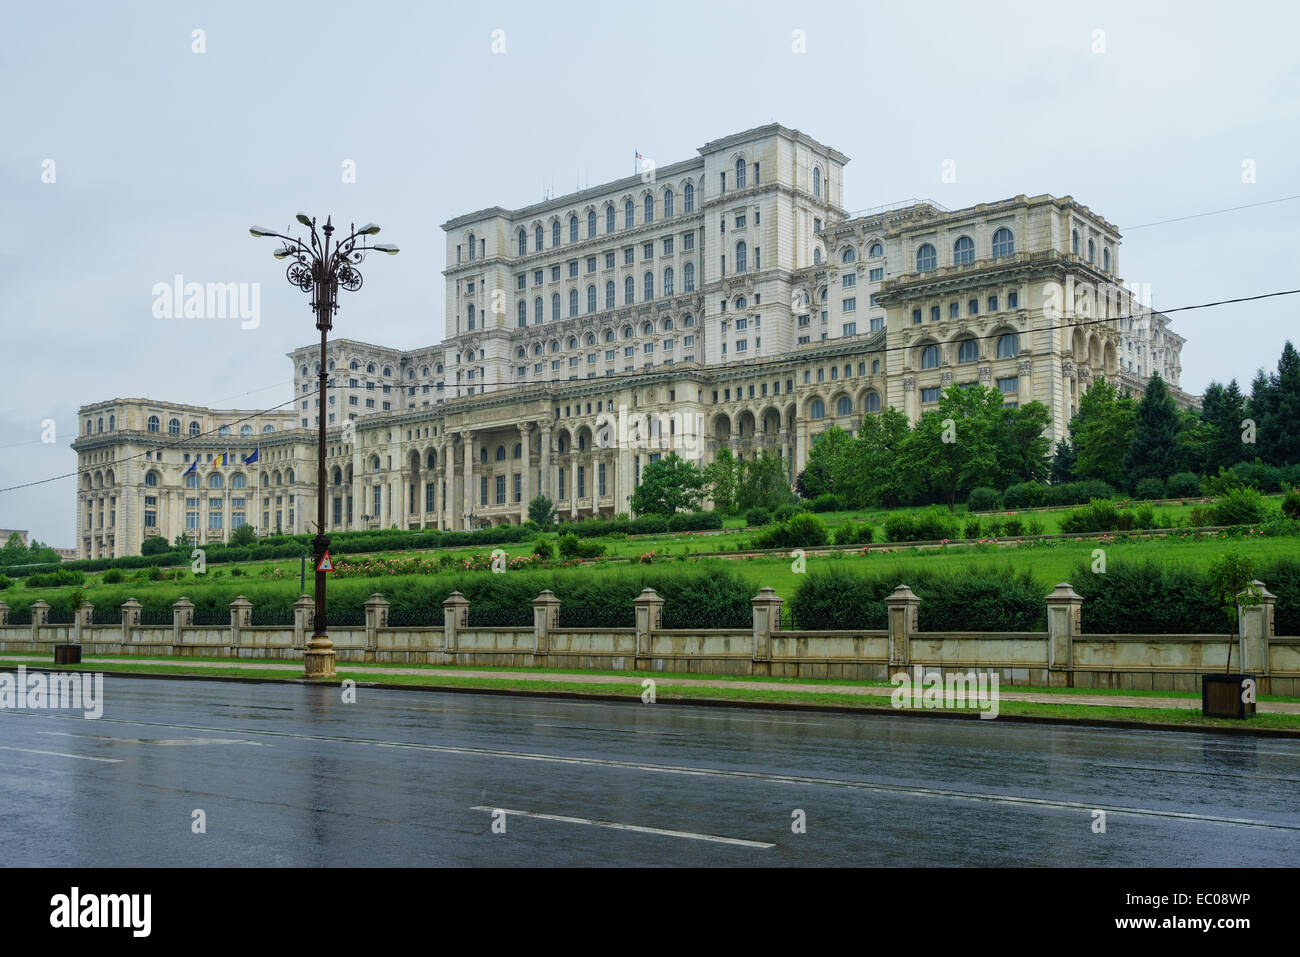 Palace of Parliament (sometimes known as the People's Palace) in Bucharest, Romania. Called Palatul Parlamentului in Romanian. Stock Photo